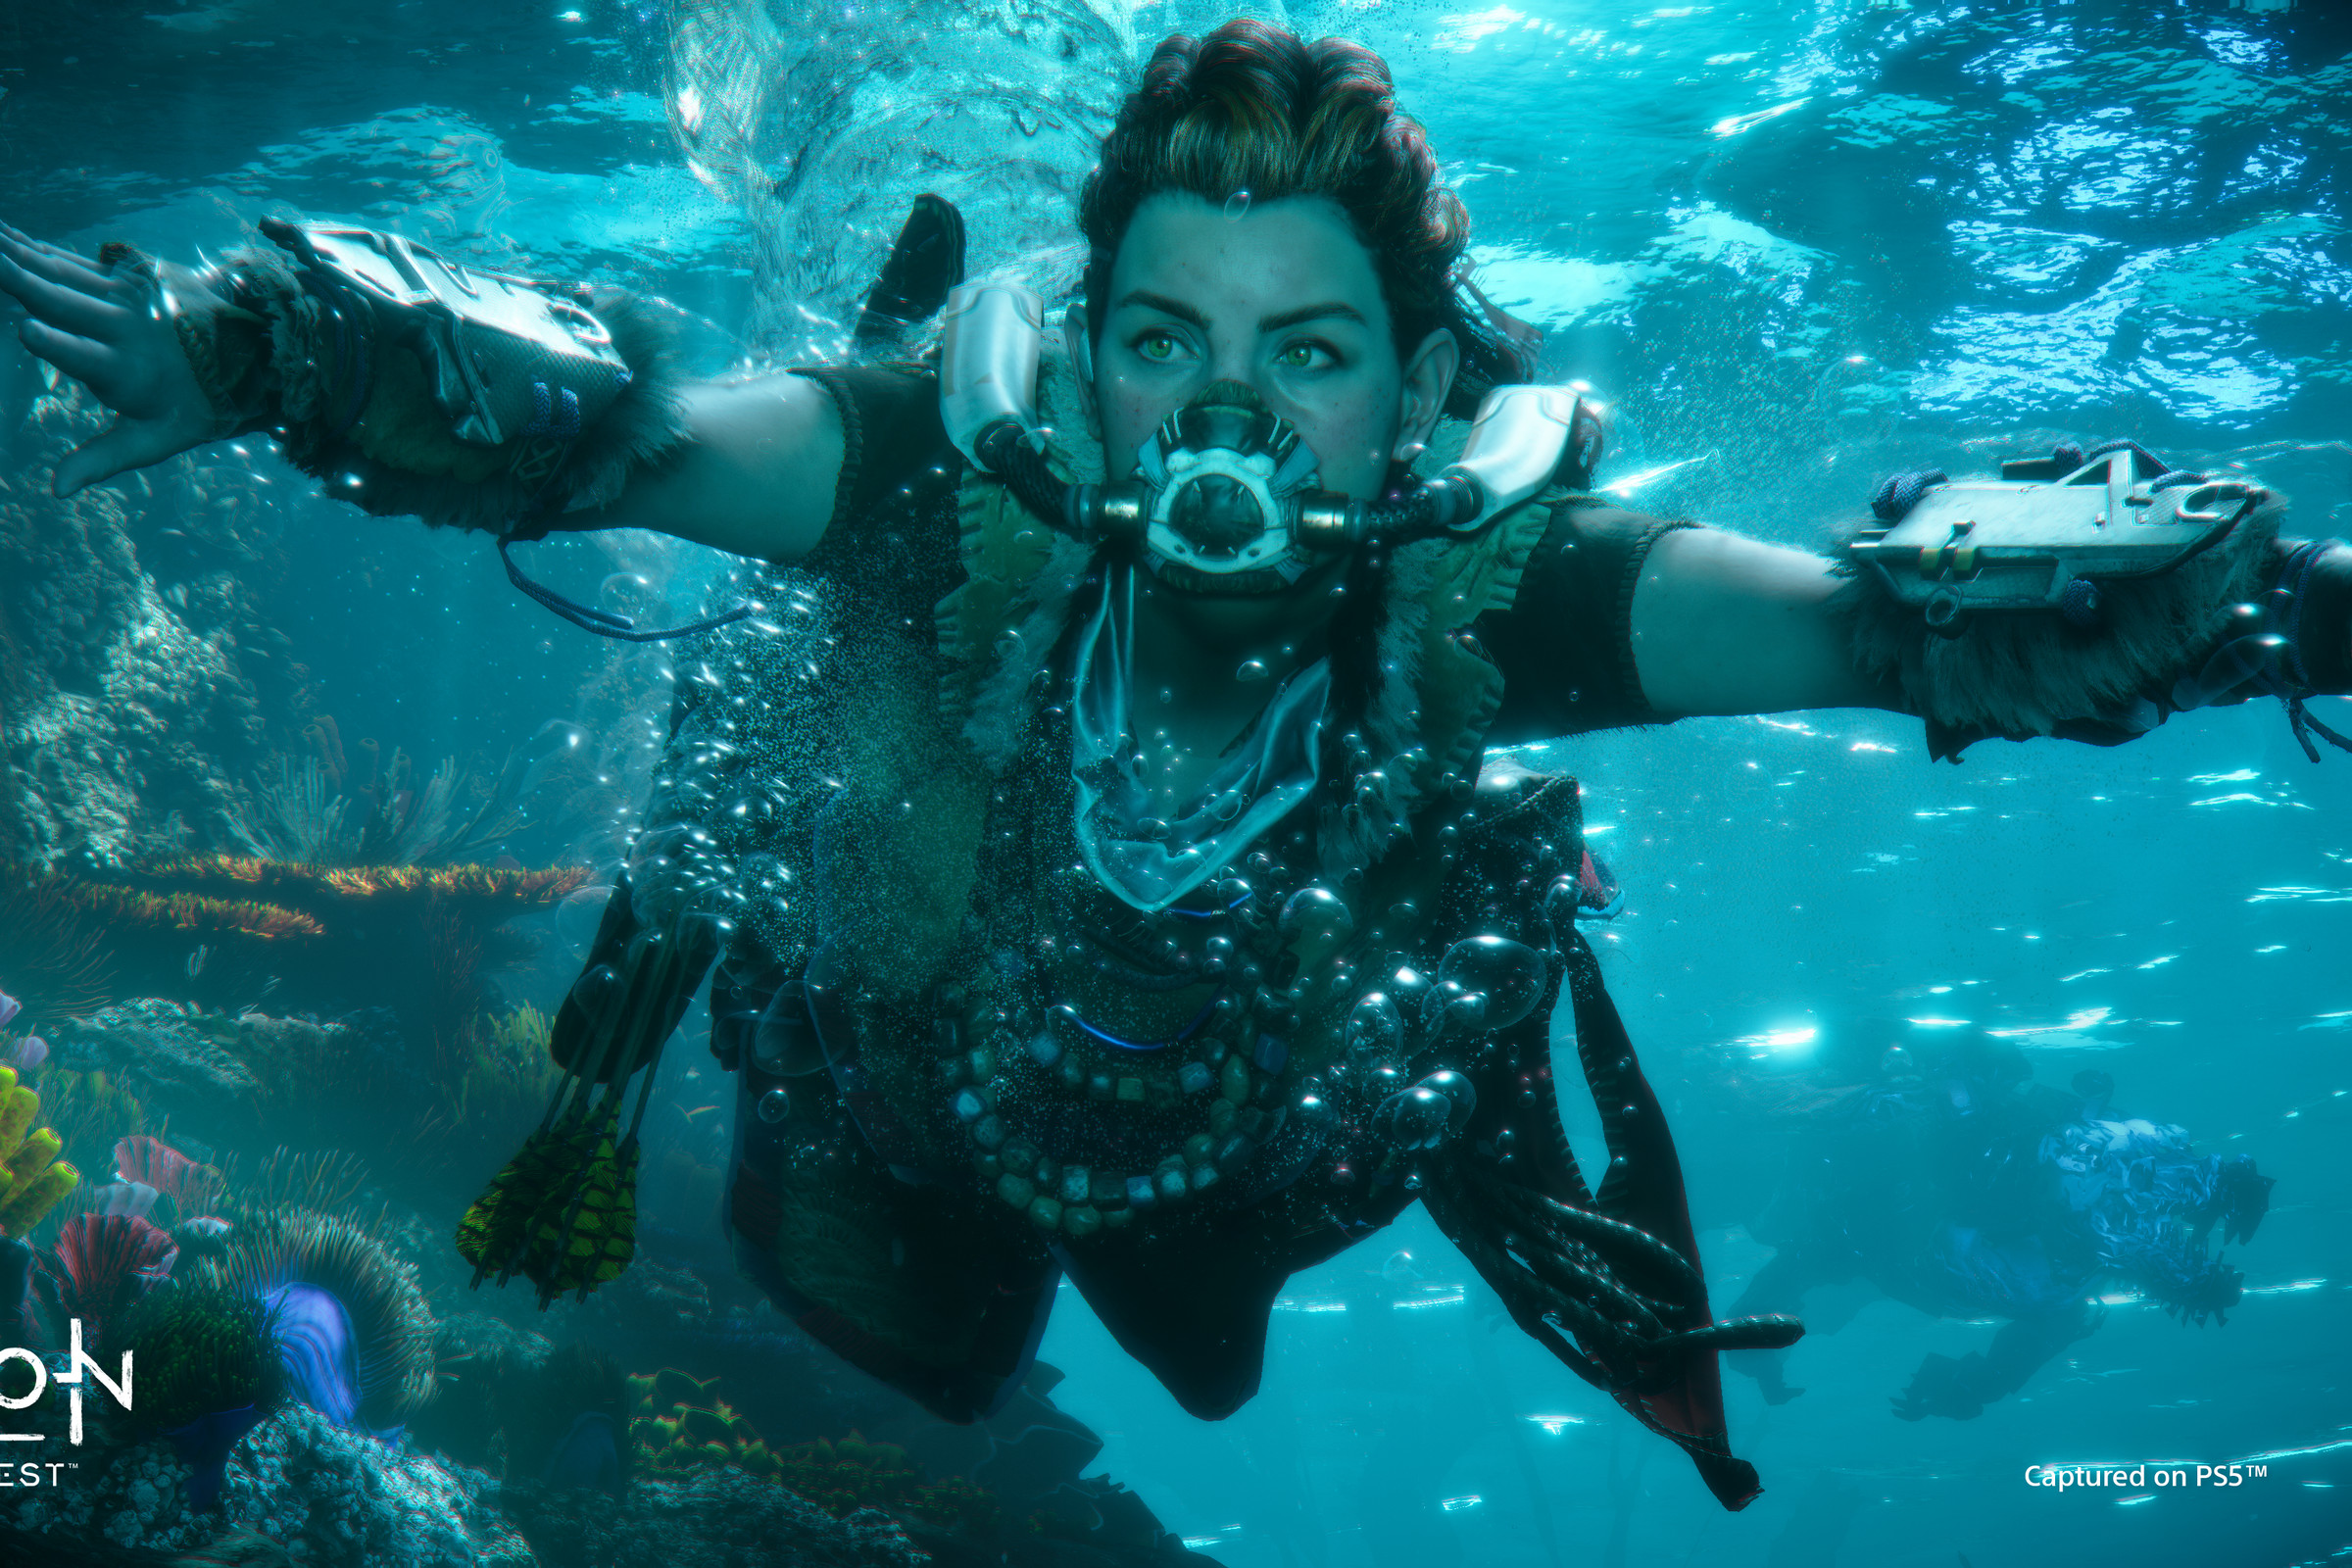 Screenshot from Horizon Forbidden West featuring the main character, Aloy, diving underwater wearing an underwater rebreather